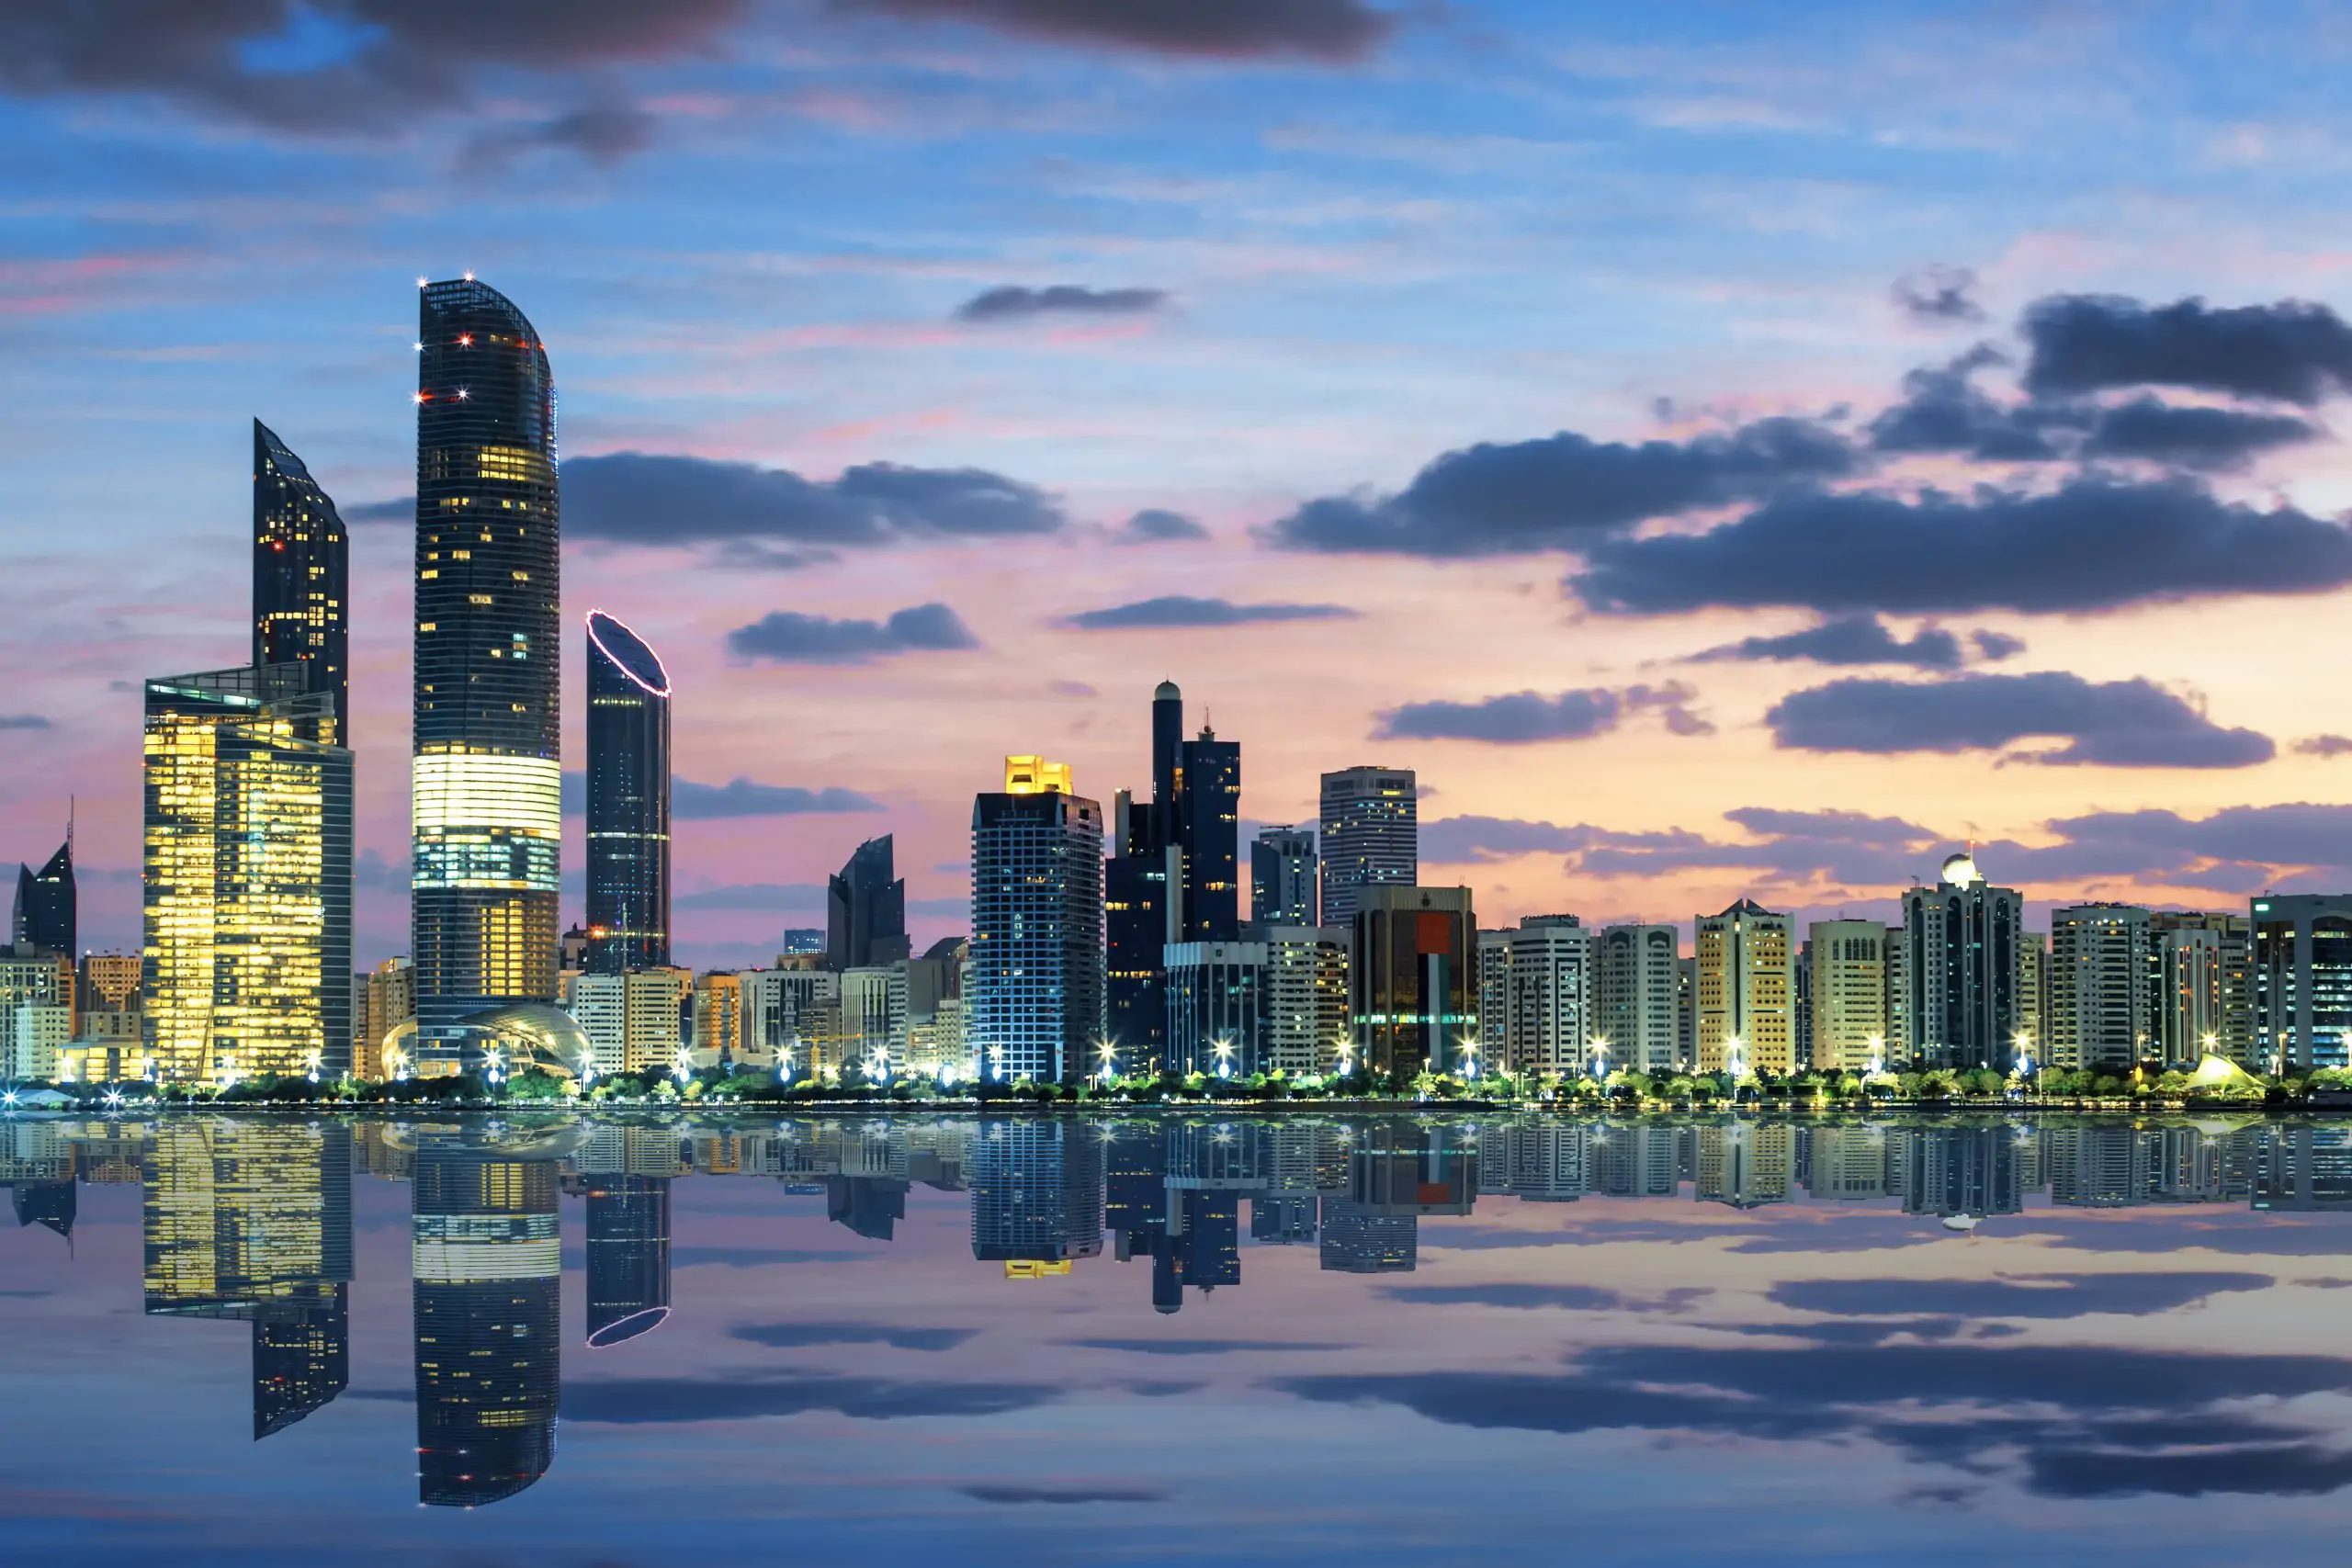 A PRODUCTION HAVEN: THE 6 BEST REASONS TO FILM IN ABU DHABI